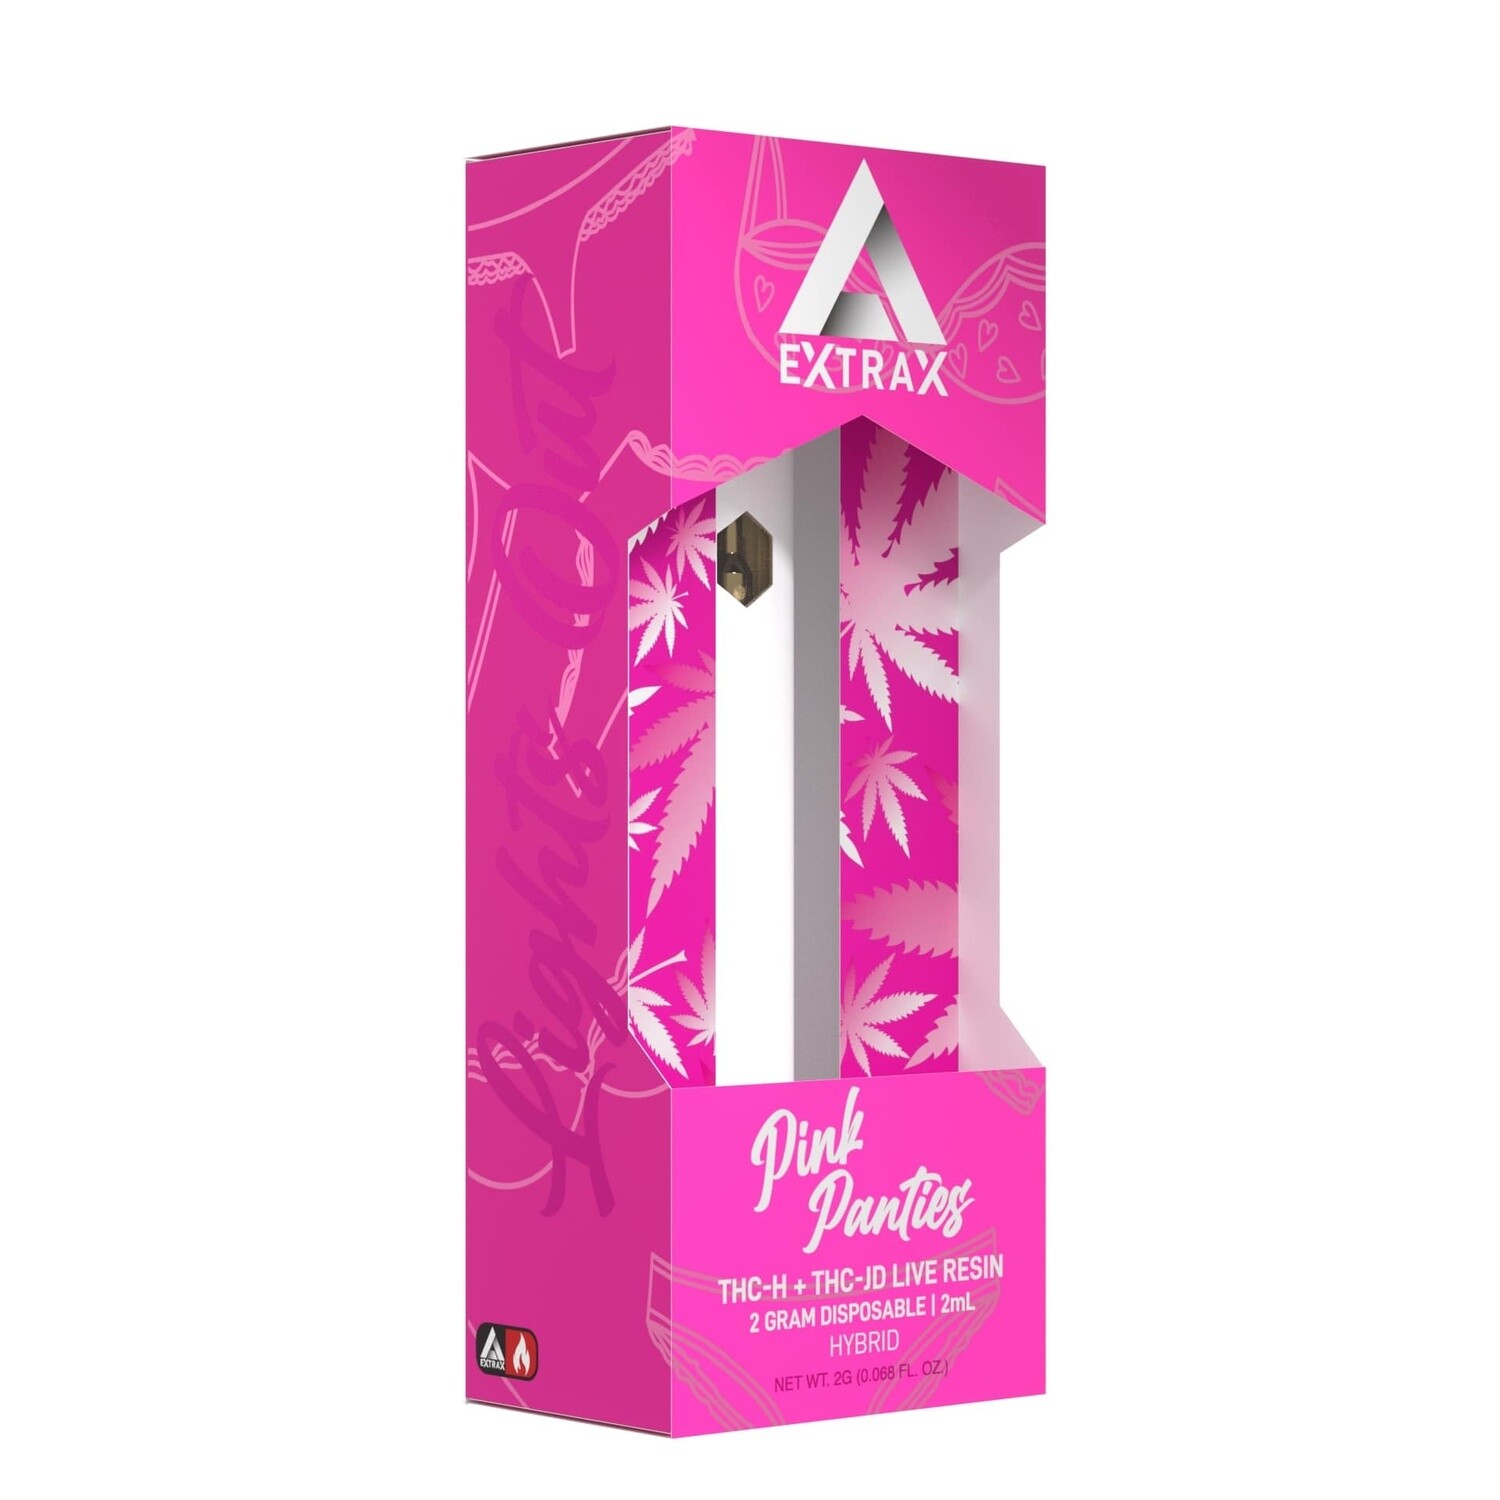 Delta Extrax Lights Out Pink Panties Disposable 2g